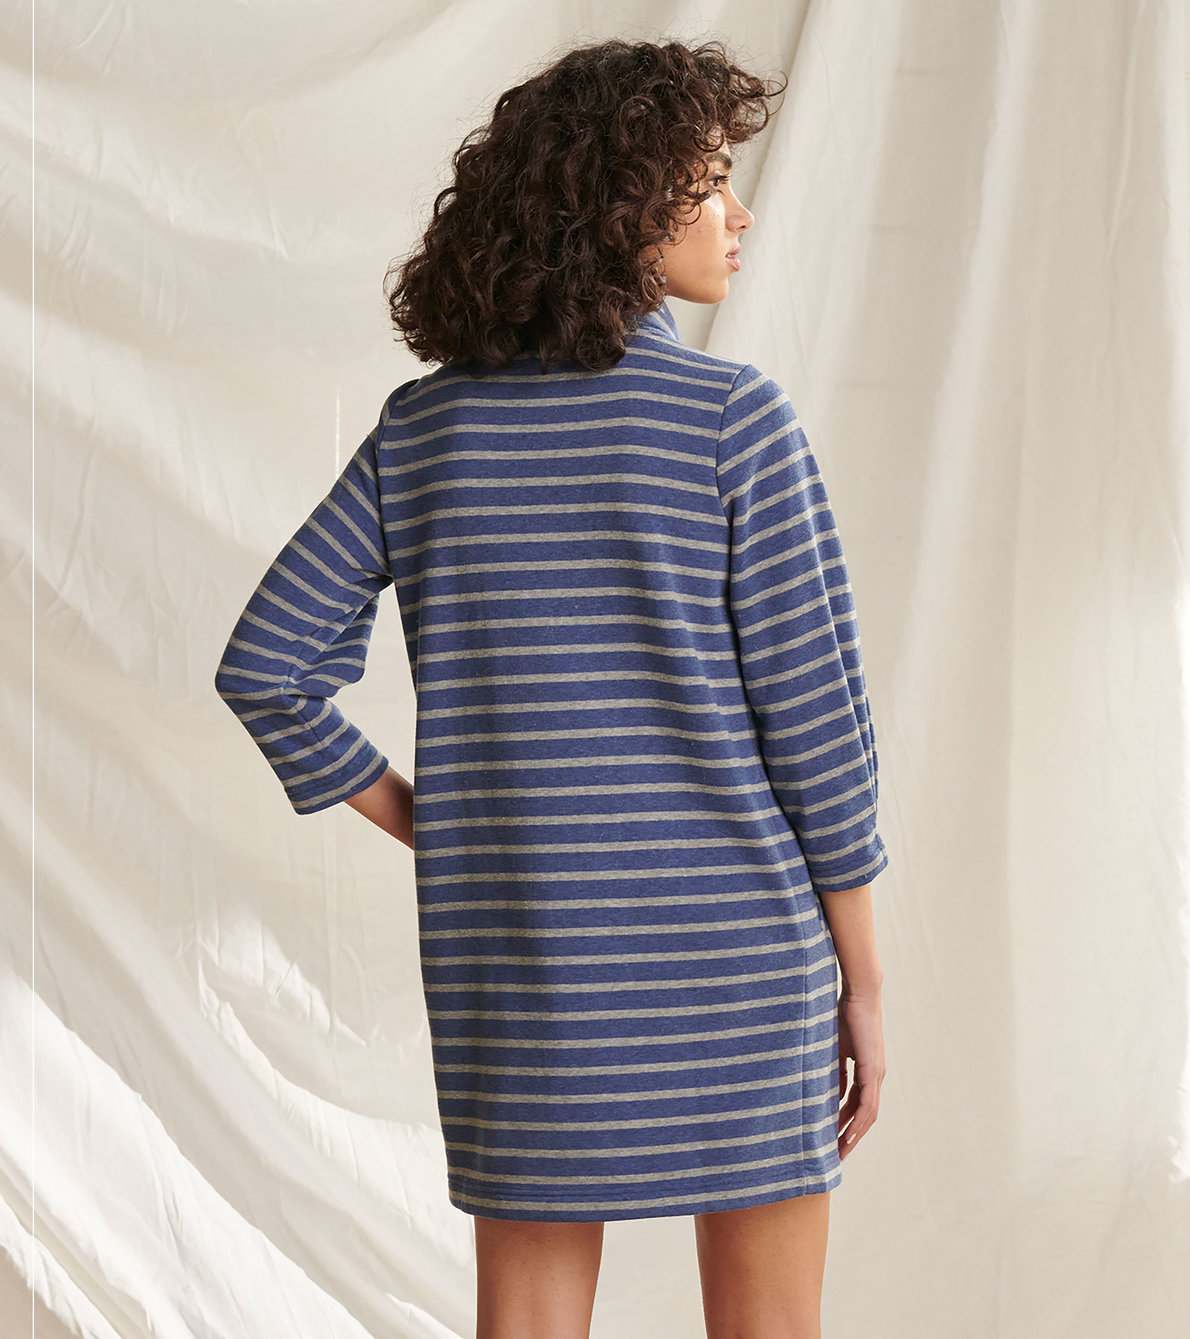 View larger image of Taylor Dress - Midnight Stripe